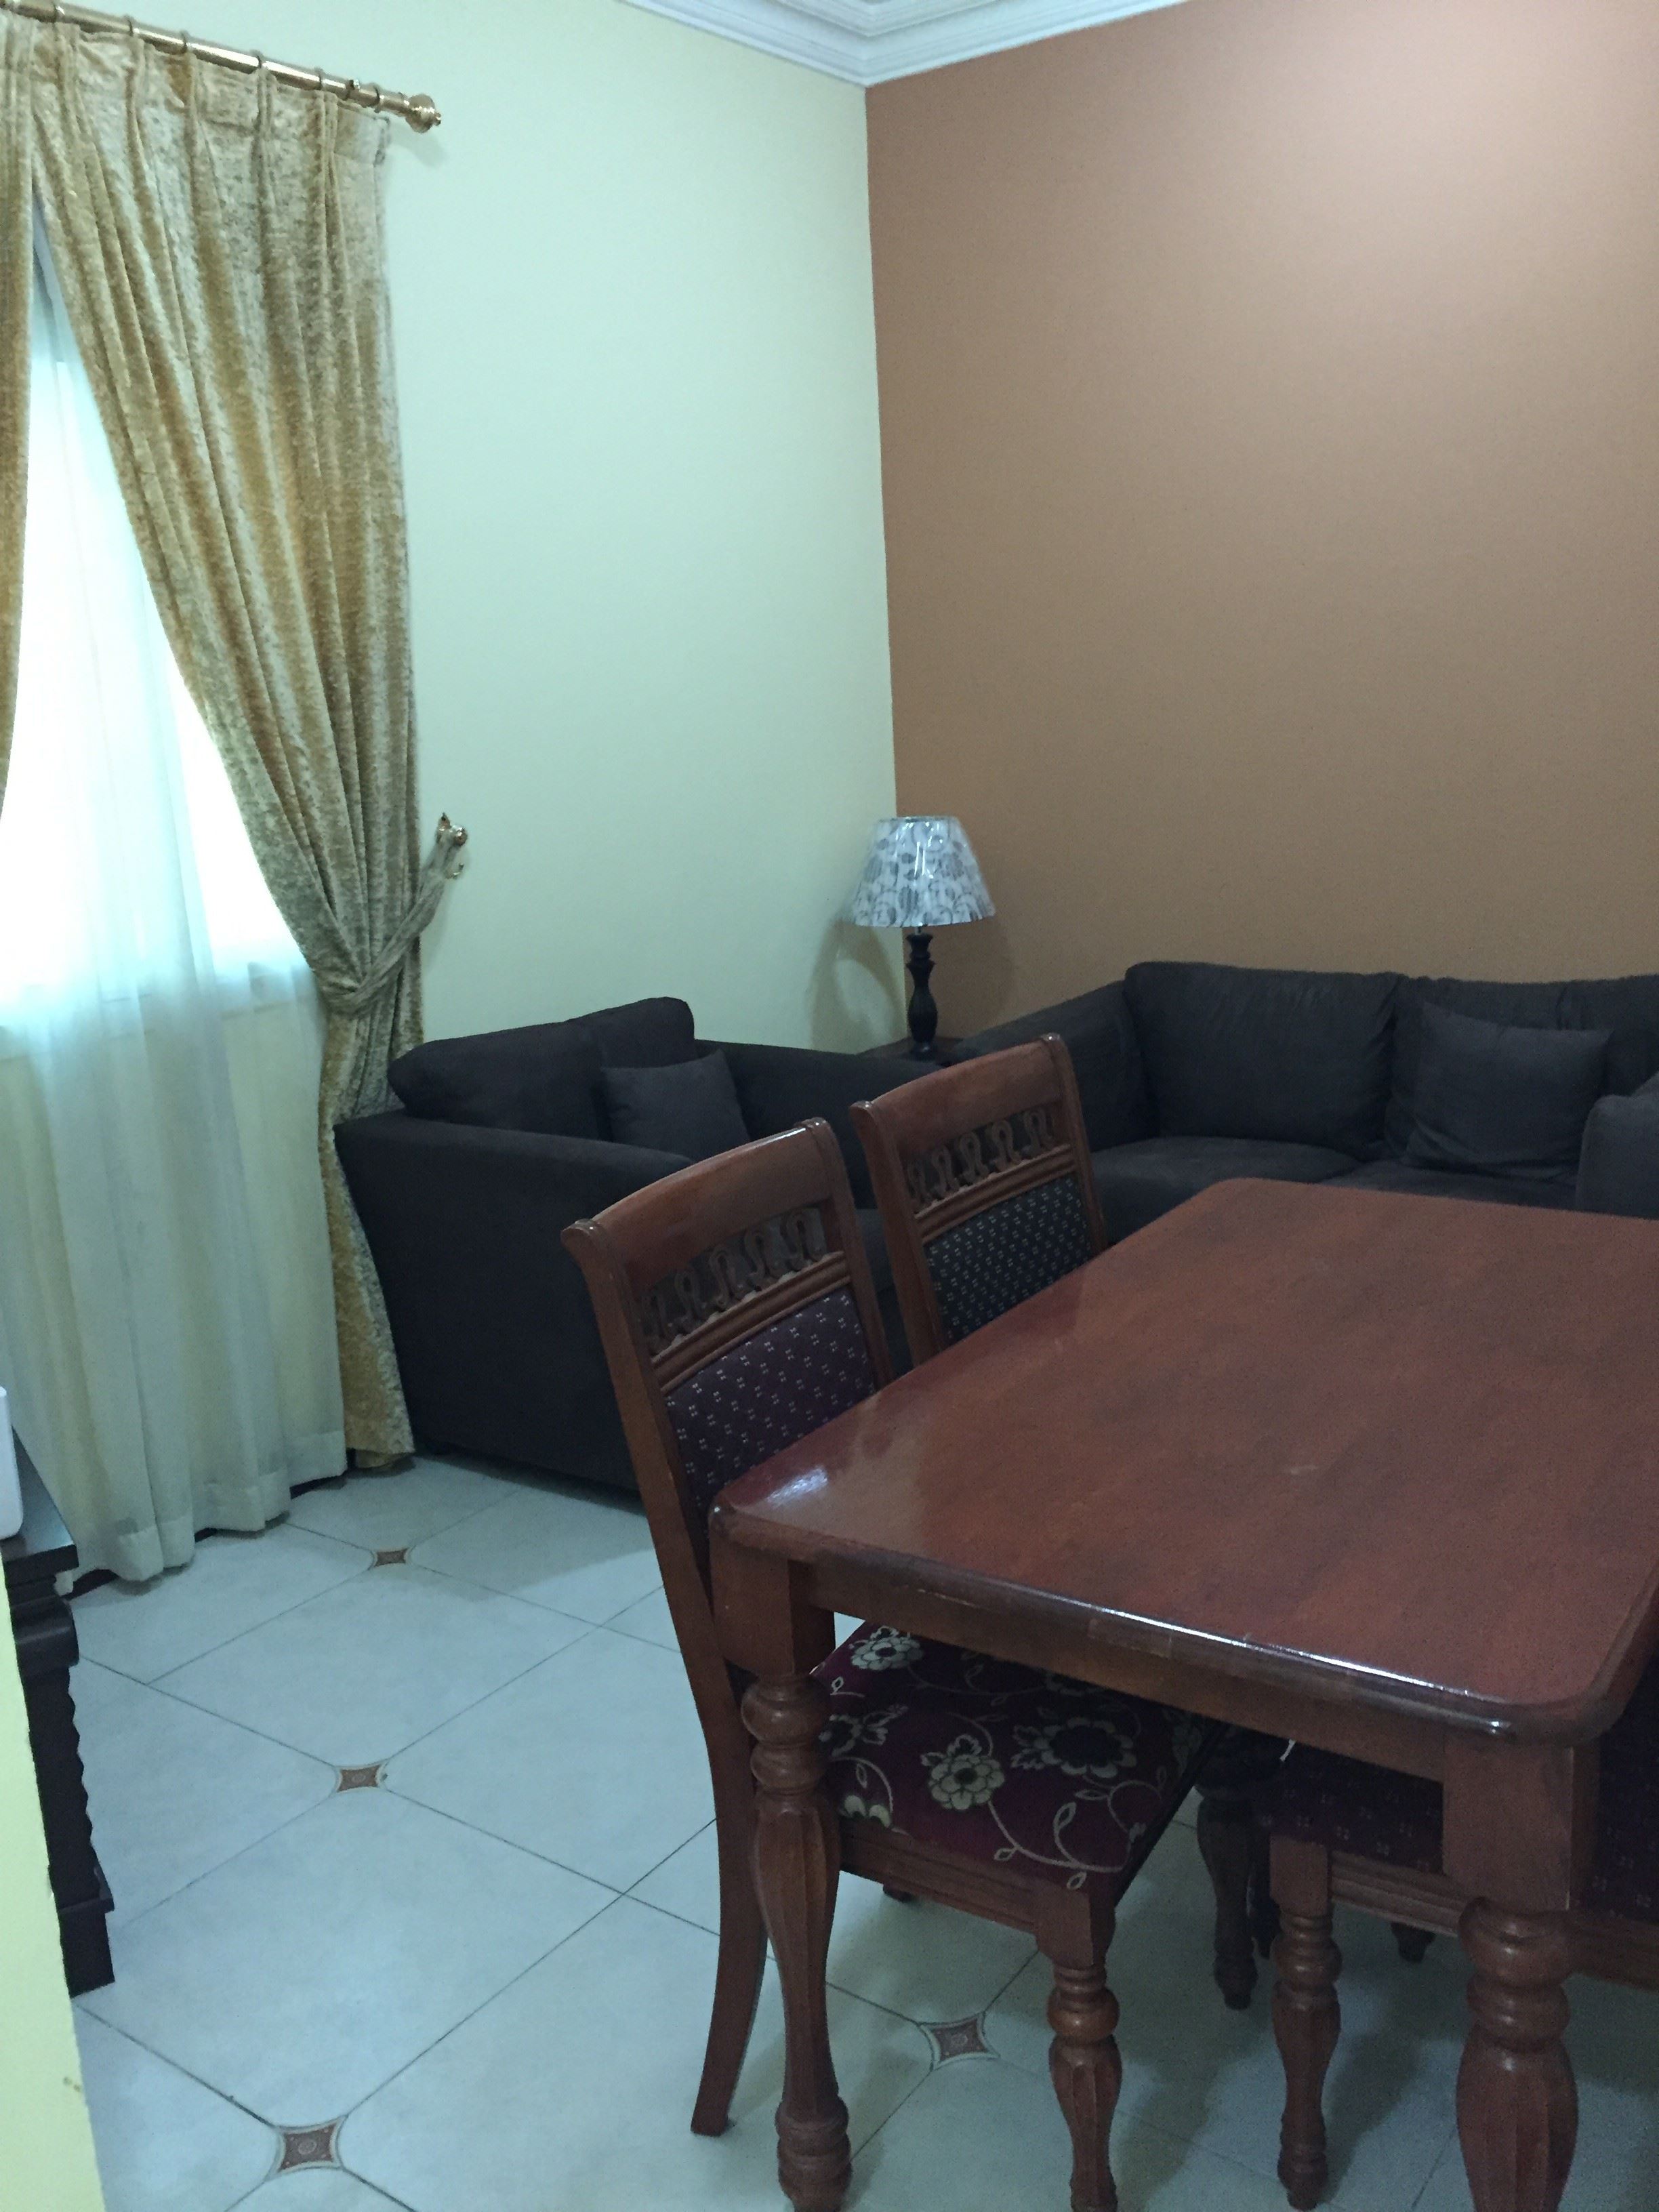 2 bedrooms furnished apartments in OldAirport P-106